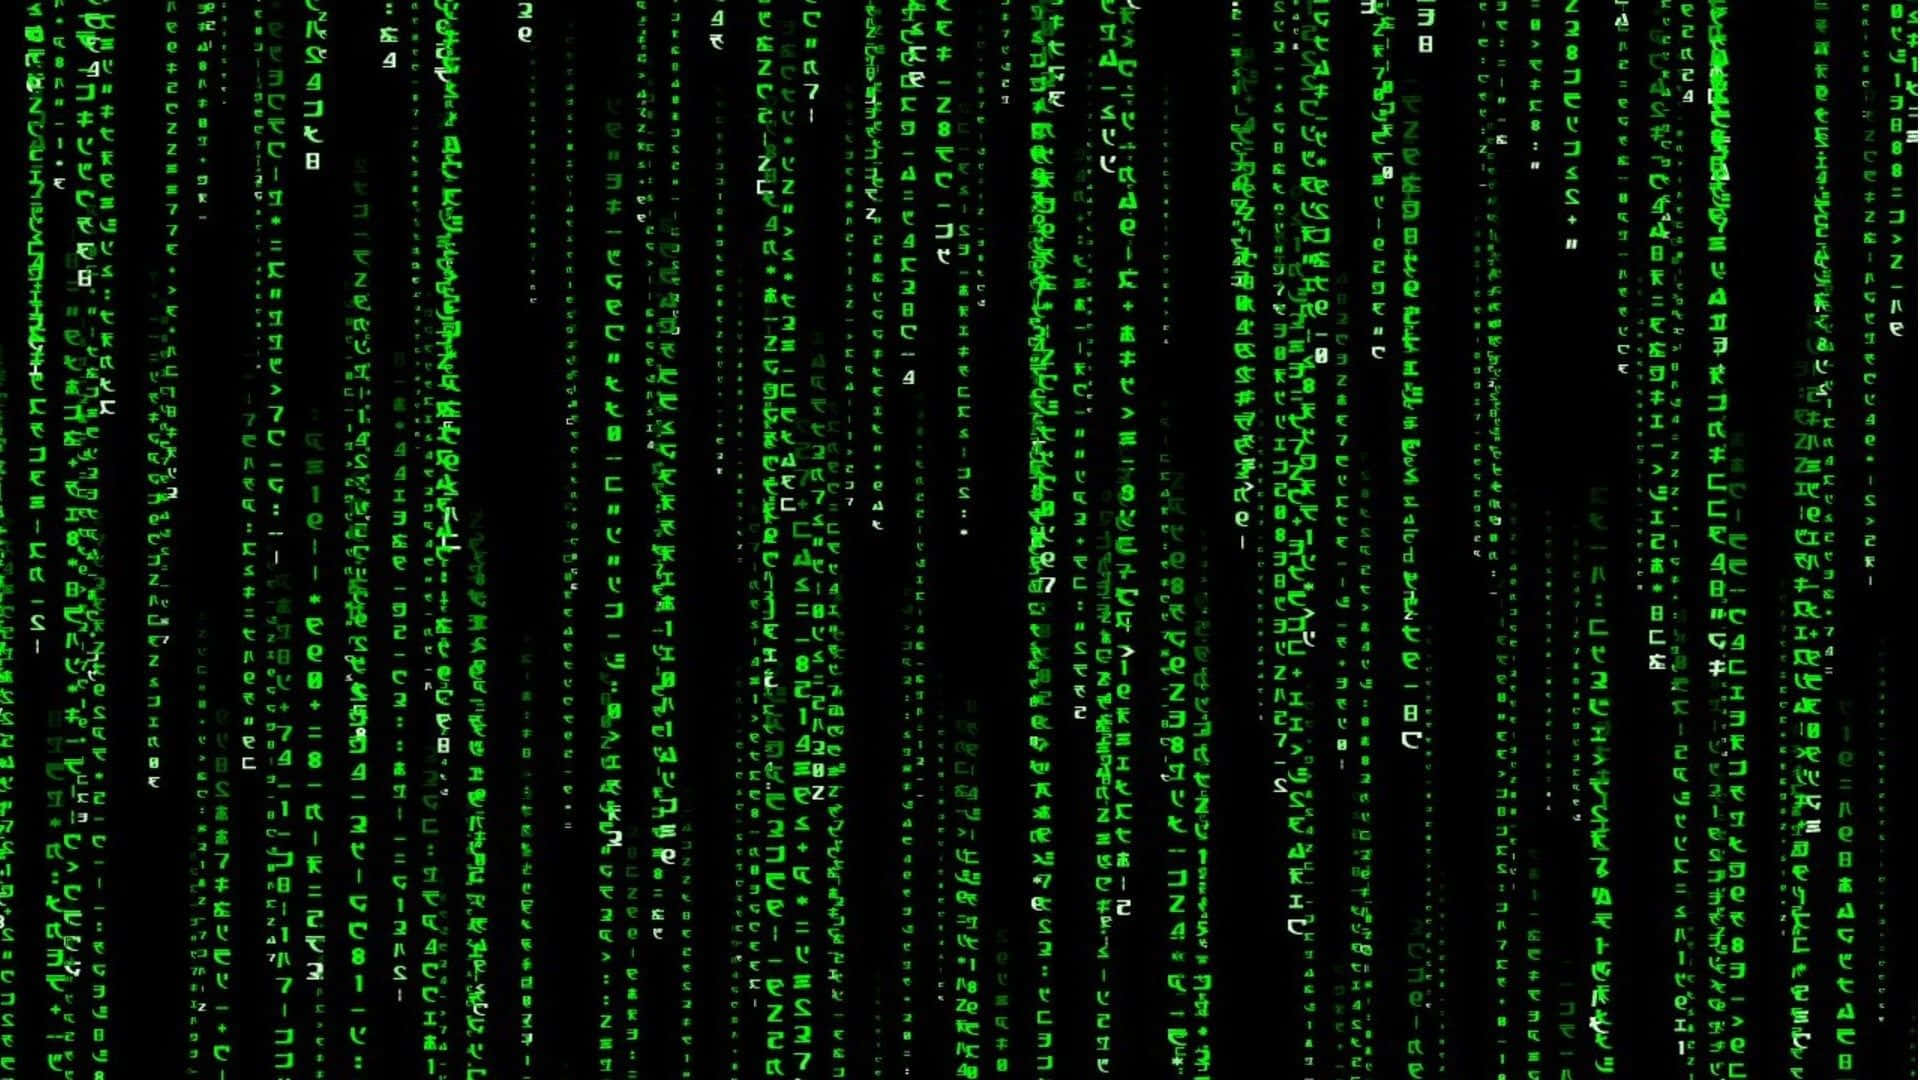 Upgrade Your Matrix Experience with The iPhone Wallpaper